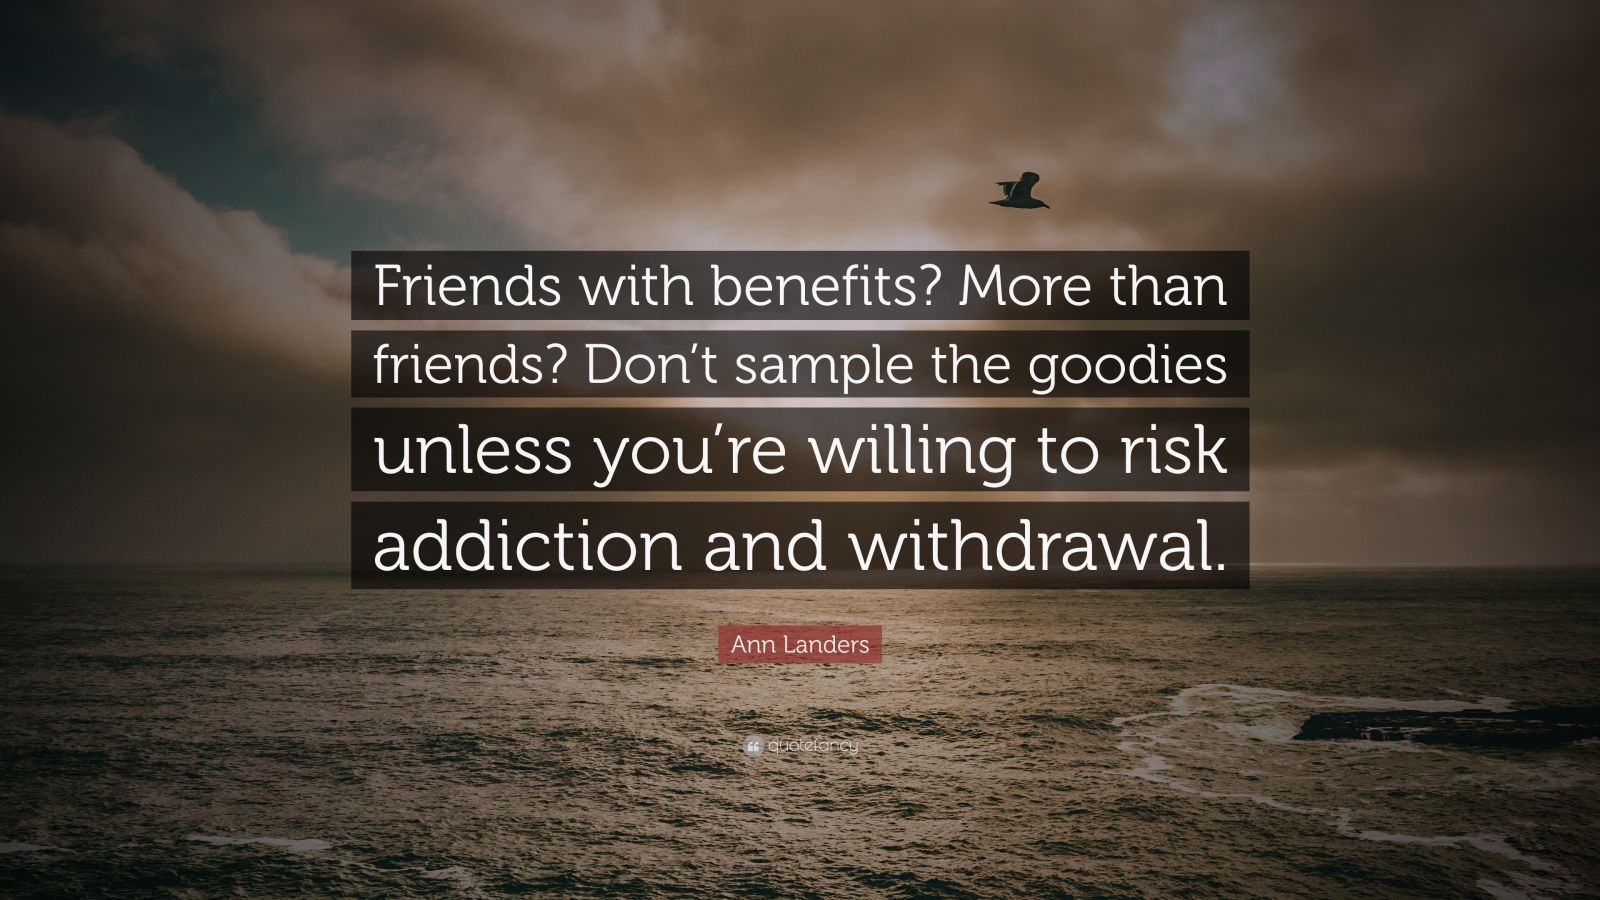 Ann Landers Quote: “Friends with benefits? More than friends? Don’t